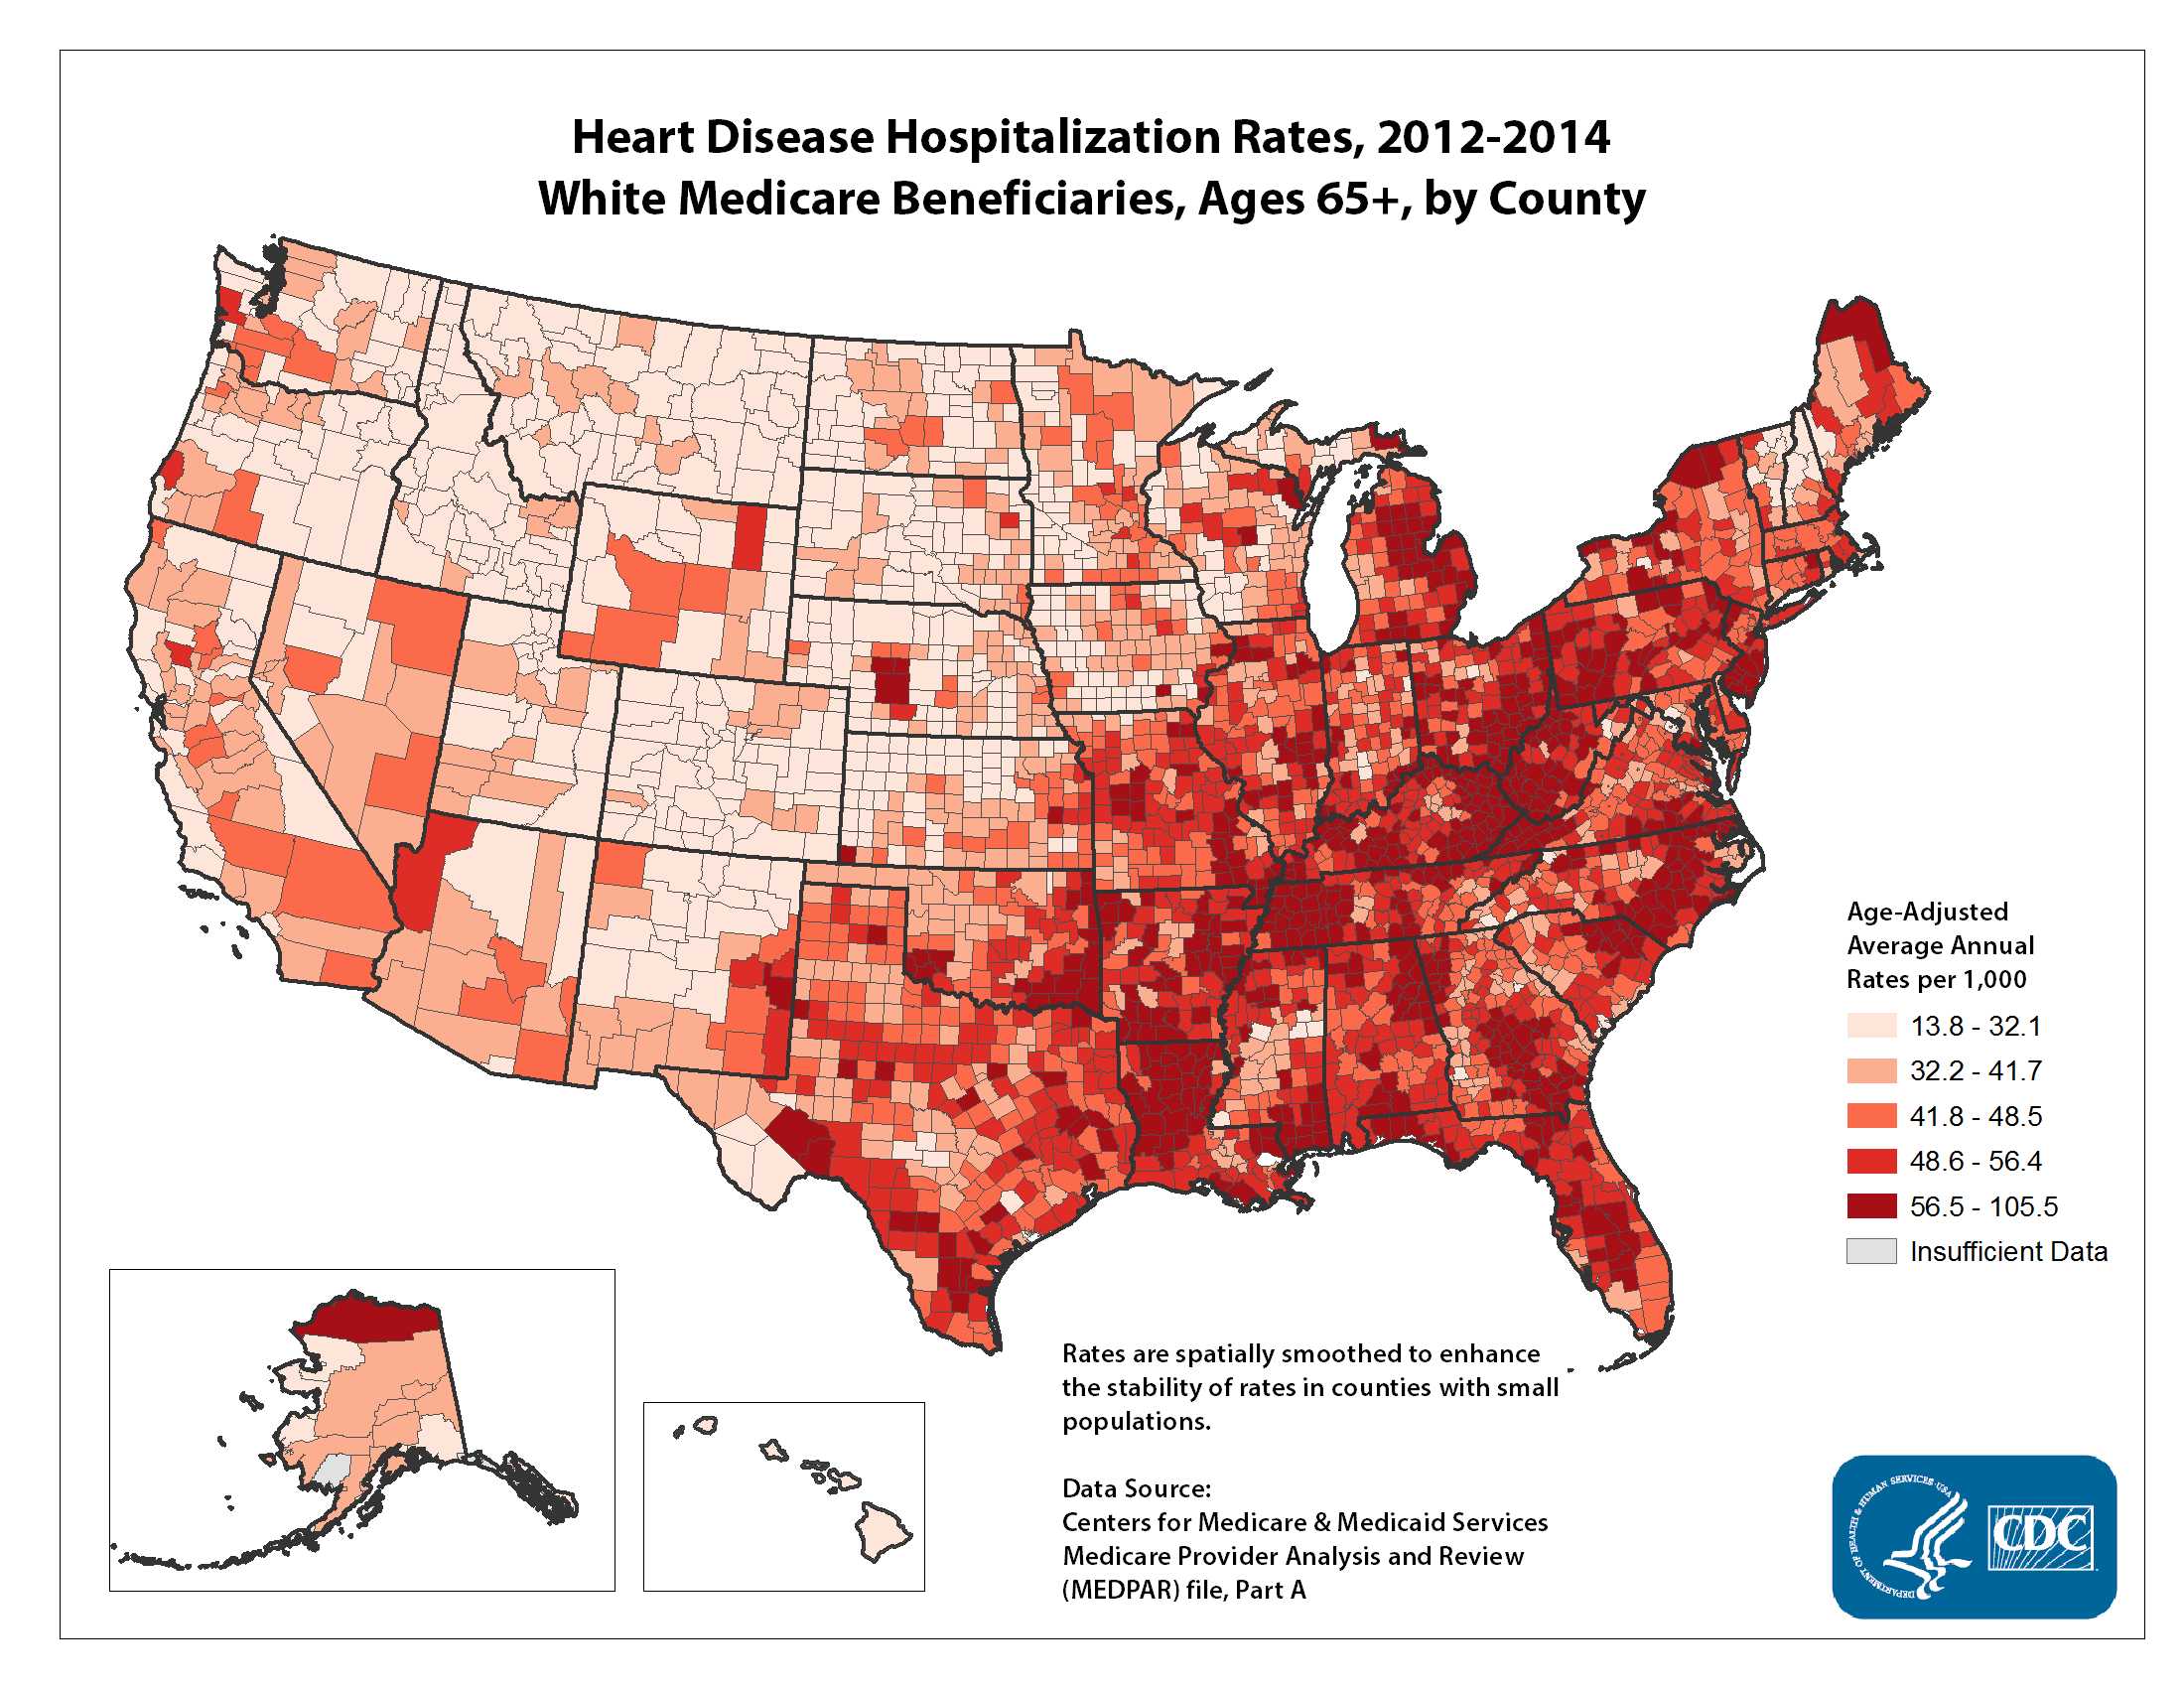 Heart Disease Hospitalization Rates for 2010 through 2012 for Whites Aged 65 Years and Older by County. The map shows that concentrations of counties with the highest heart disease hospitalization rates - meaning the top quintile - are located primarily in Louisiana, Tennessee, Kentucky, West Virginia, Ohio, and Pennsylvania. Pockets of high-rate counties also were found in Alabama, Mississippi, Arkansas, Missouri, Virginia, Georgia, North Carolina, and South Carolina.